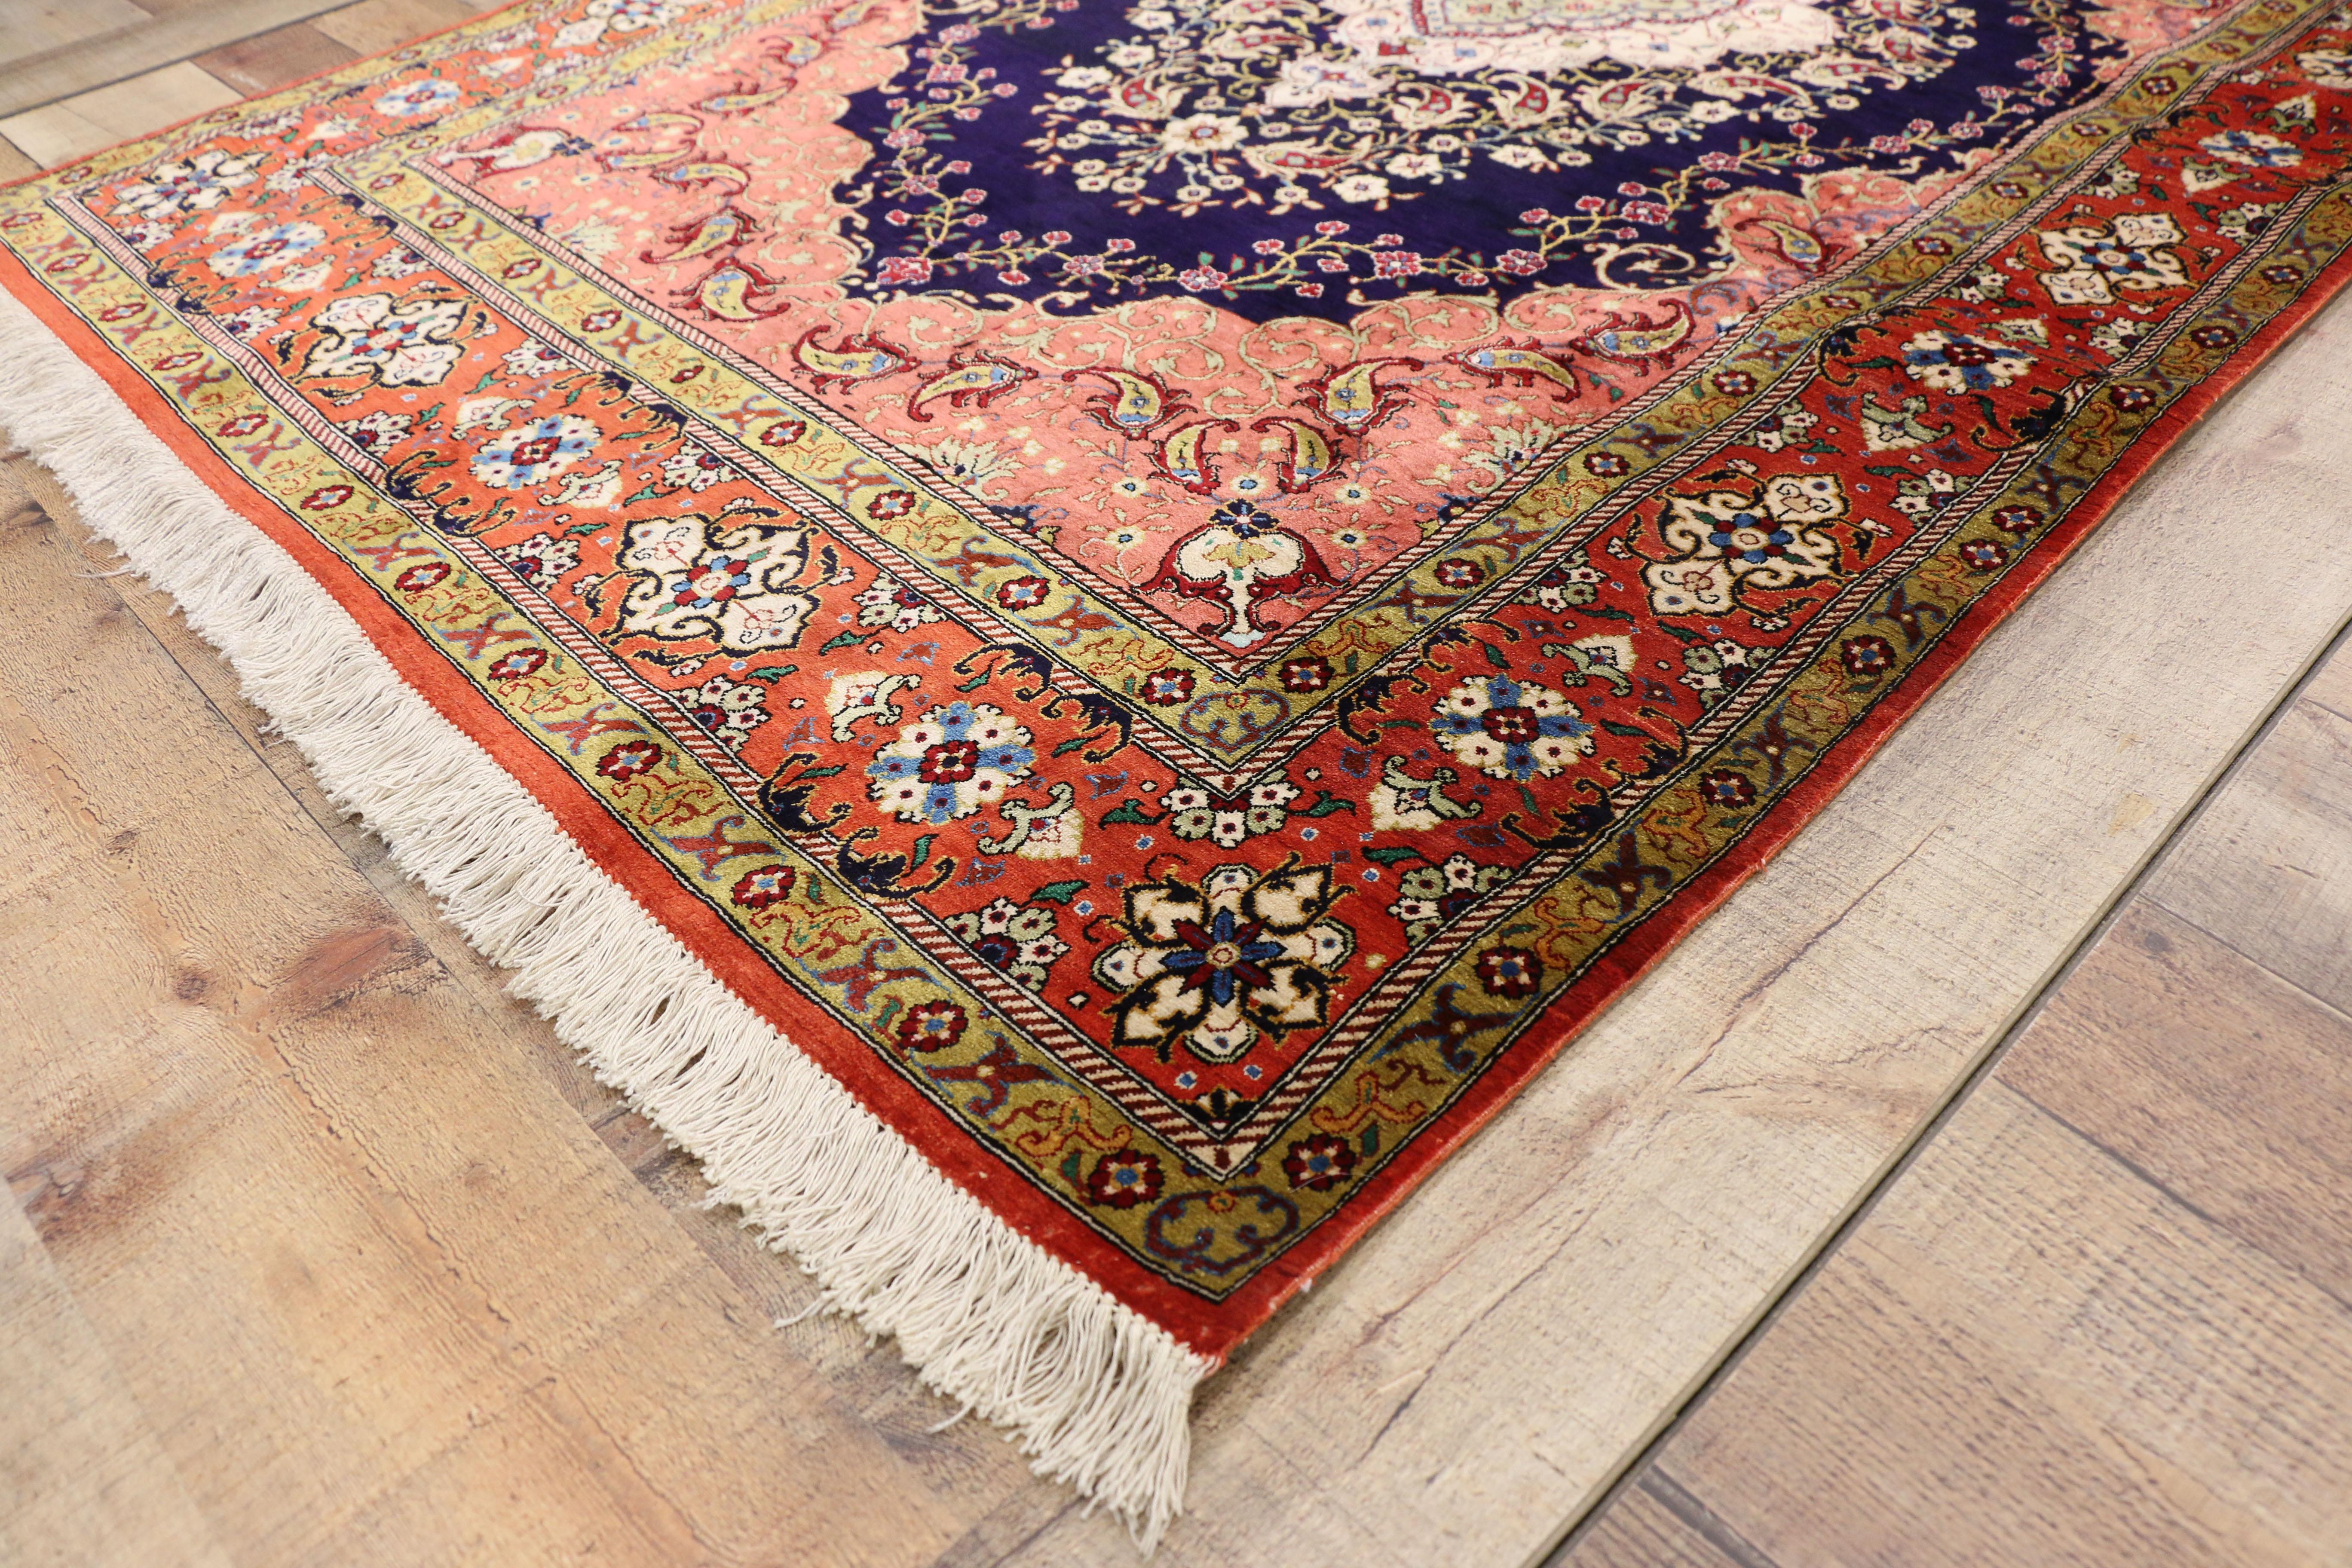 77198, vintage Persian silk Qum rug with French Rococo style. French Rococo decadence meets handwoven Persian excellence in this stunning hand knotted vintage silk Qum rug. At the centre, a celadon and ivory lobed diamond medallion against a